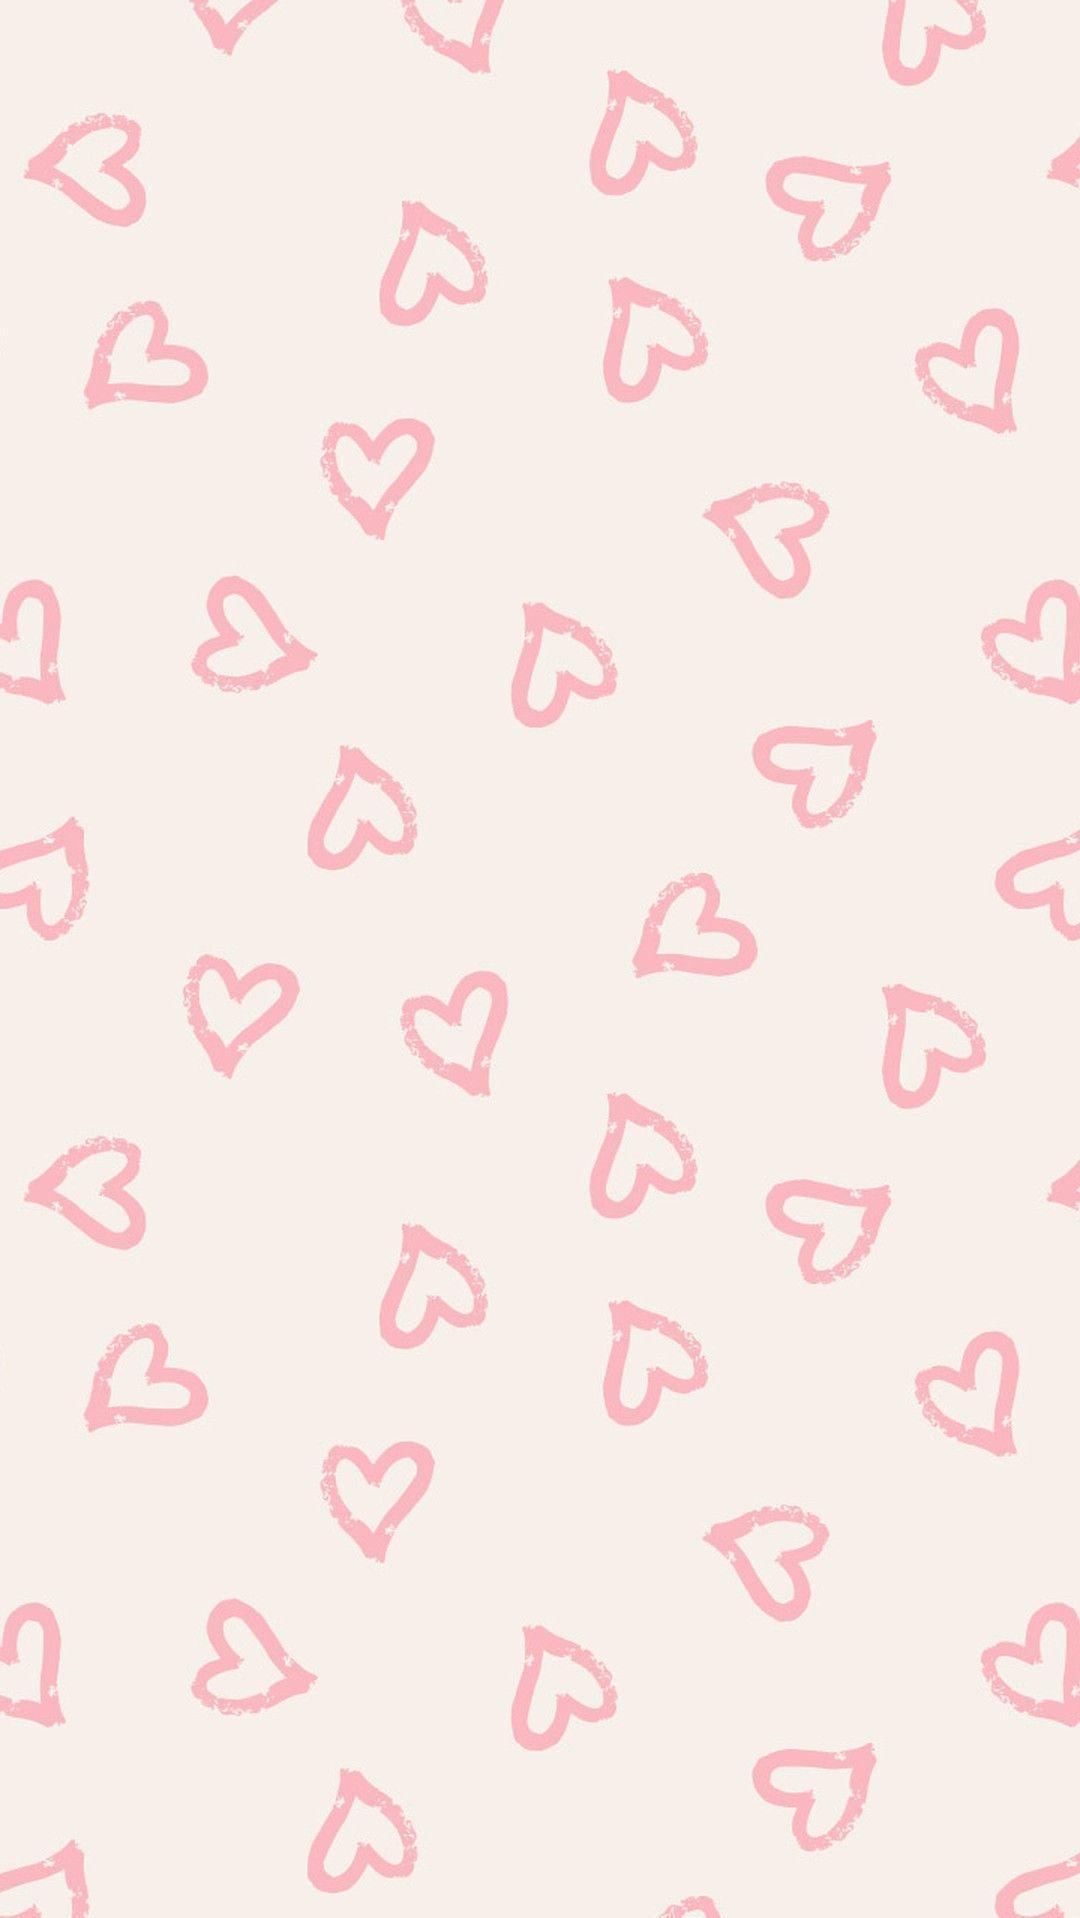 Bies Really Cute Preppy Aesthetic Wallpaper For Your Phone